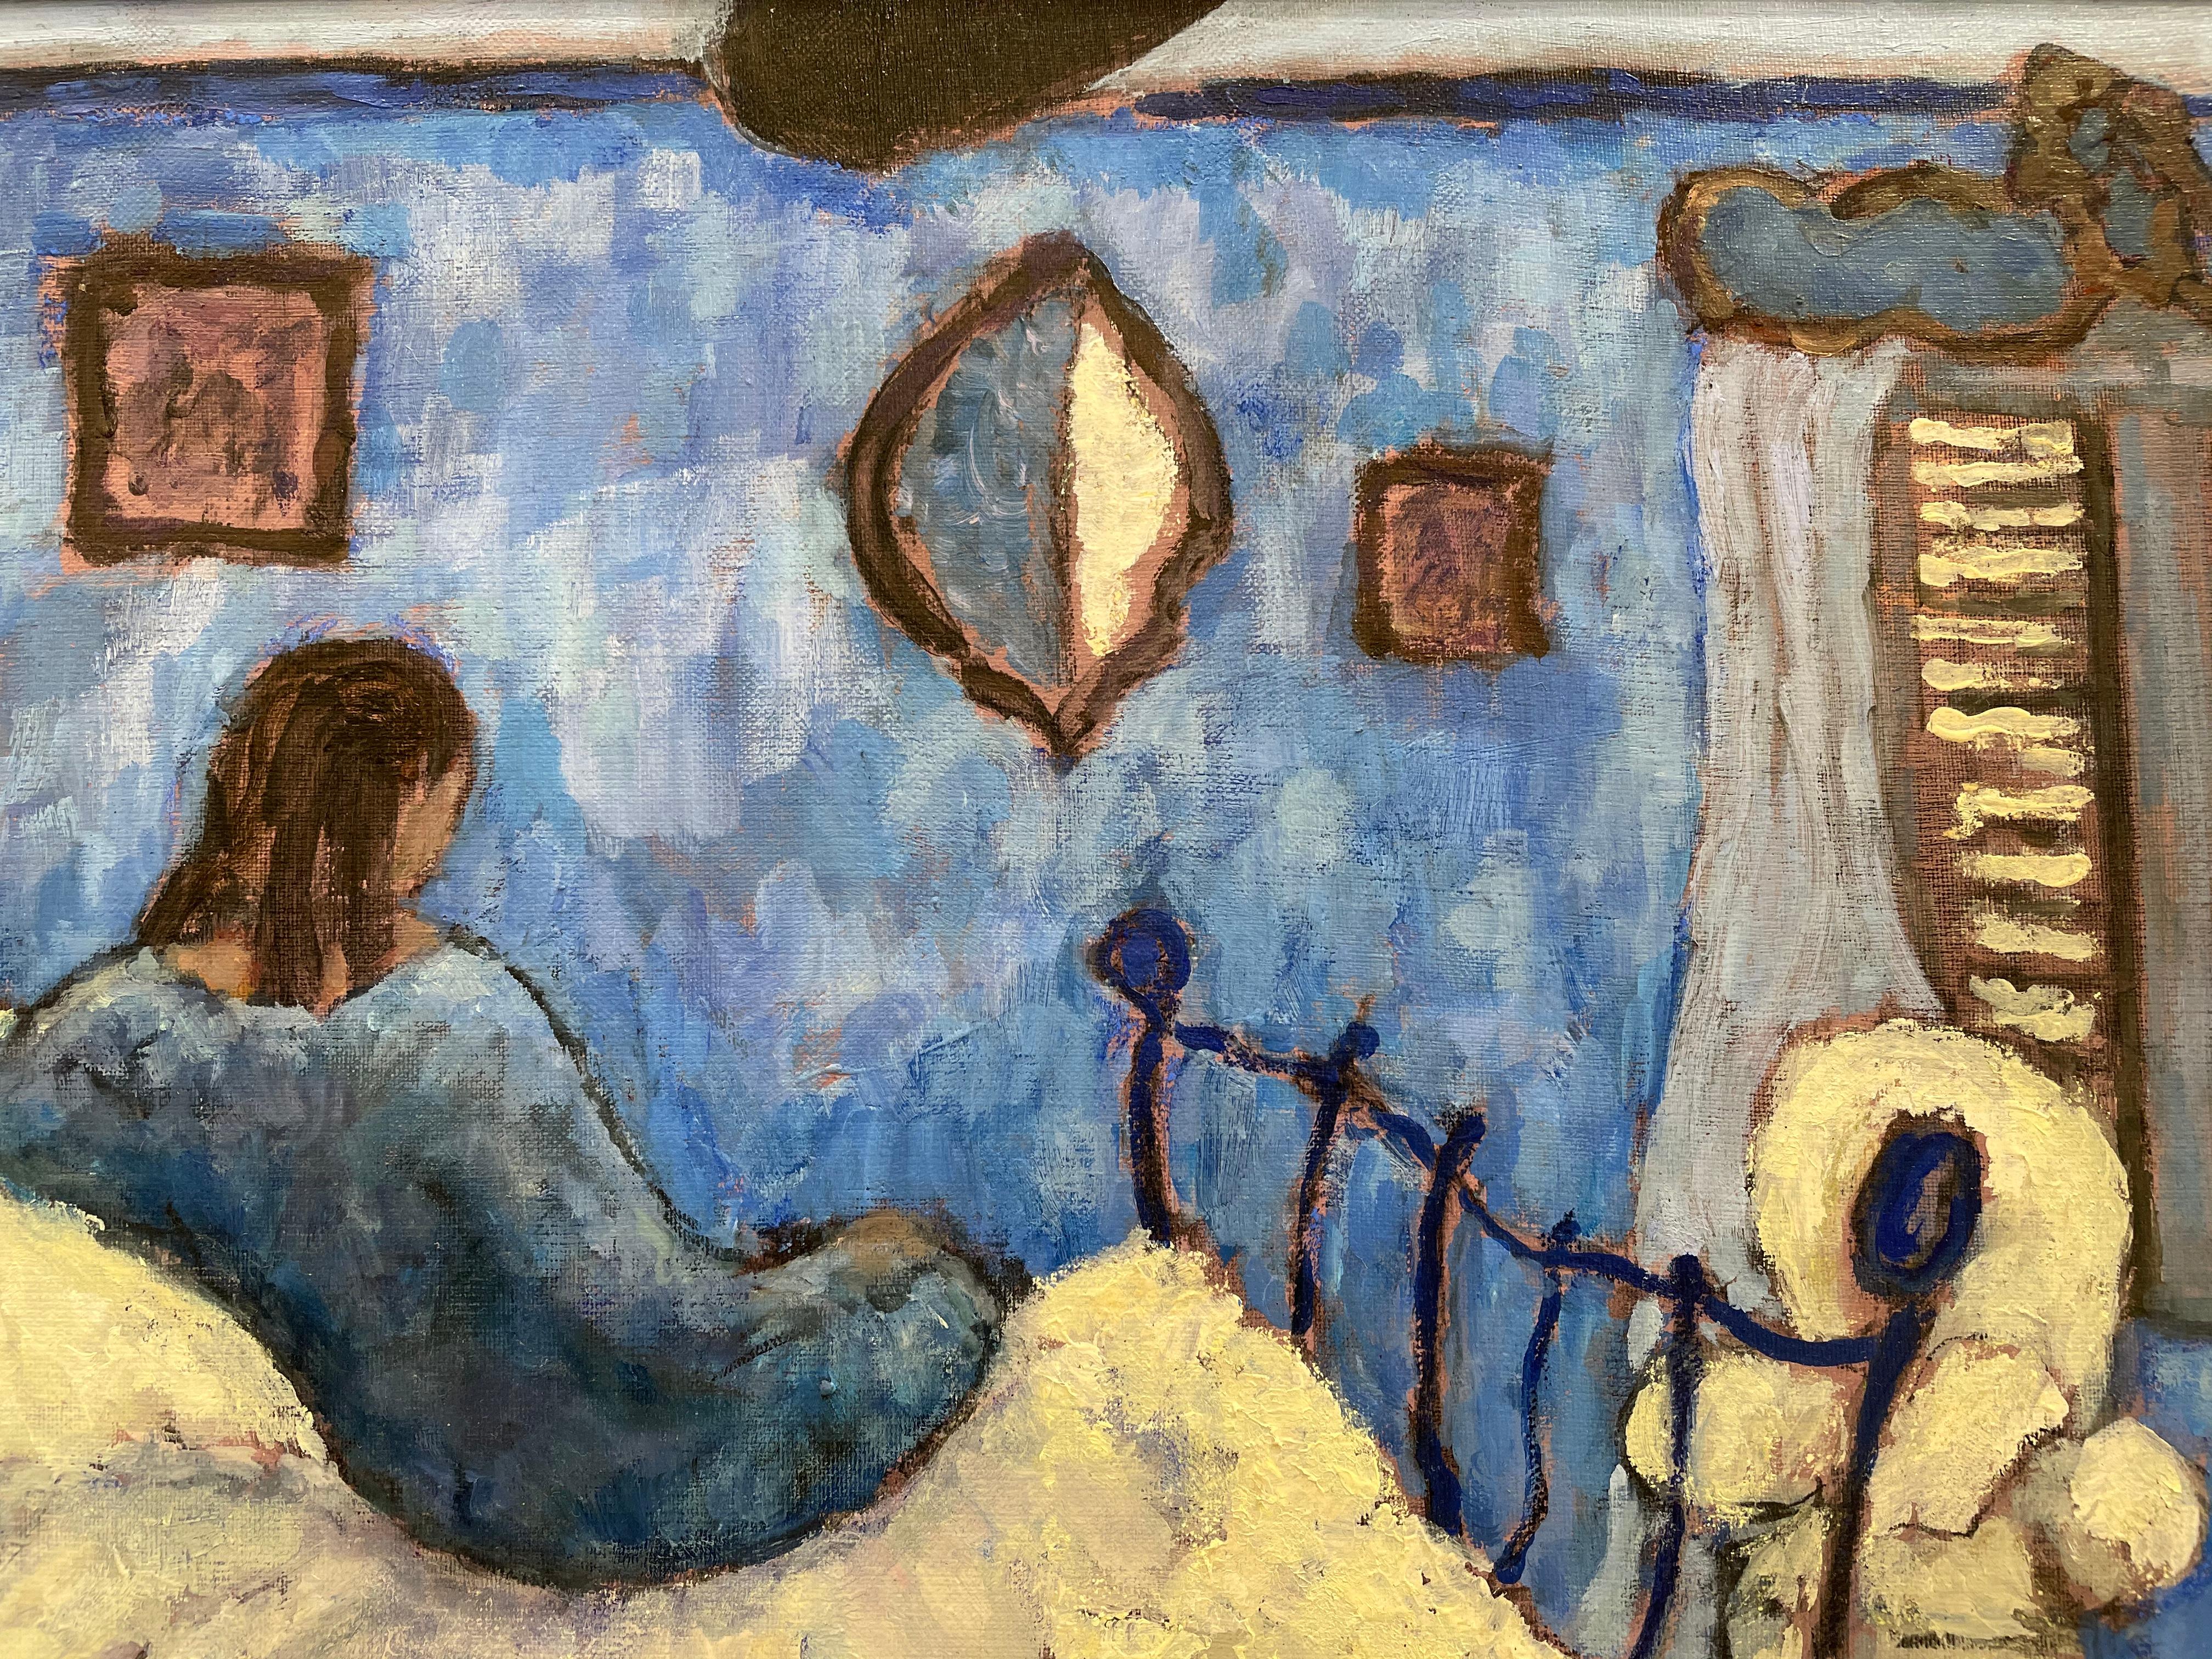 Title - The Blue Room - Post-Impressionist Painting by Anthony Murphy